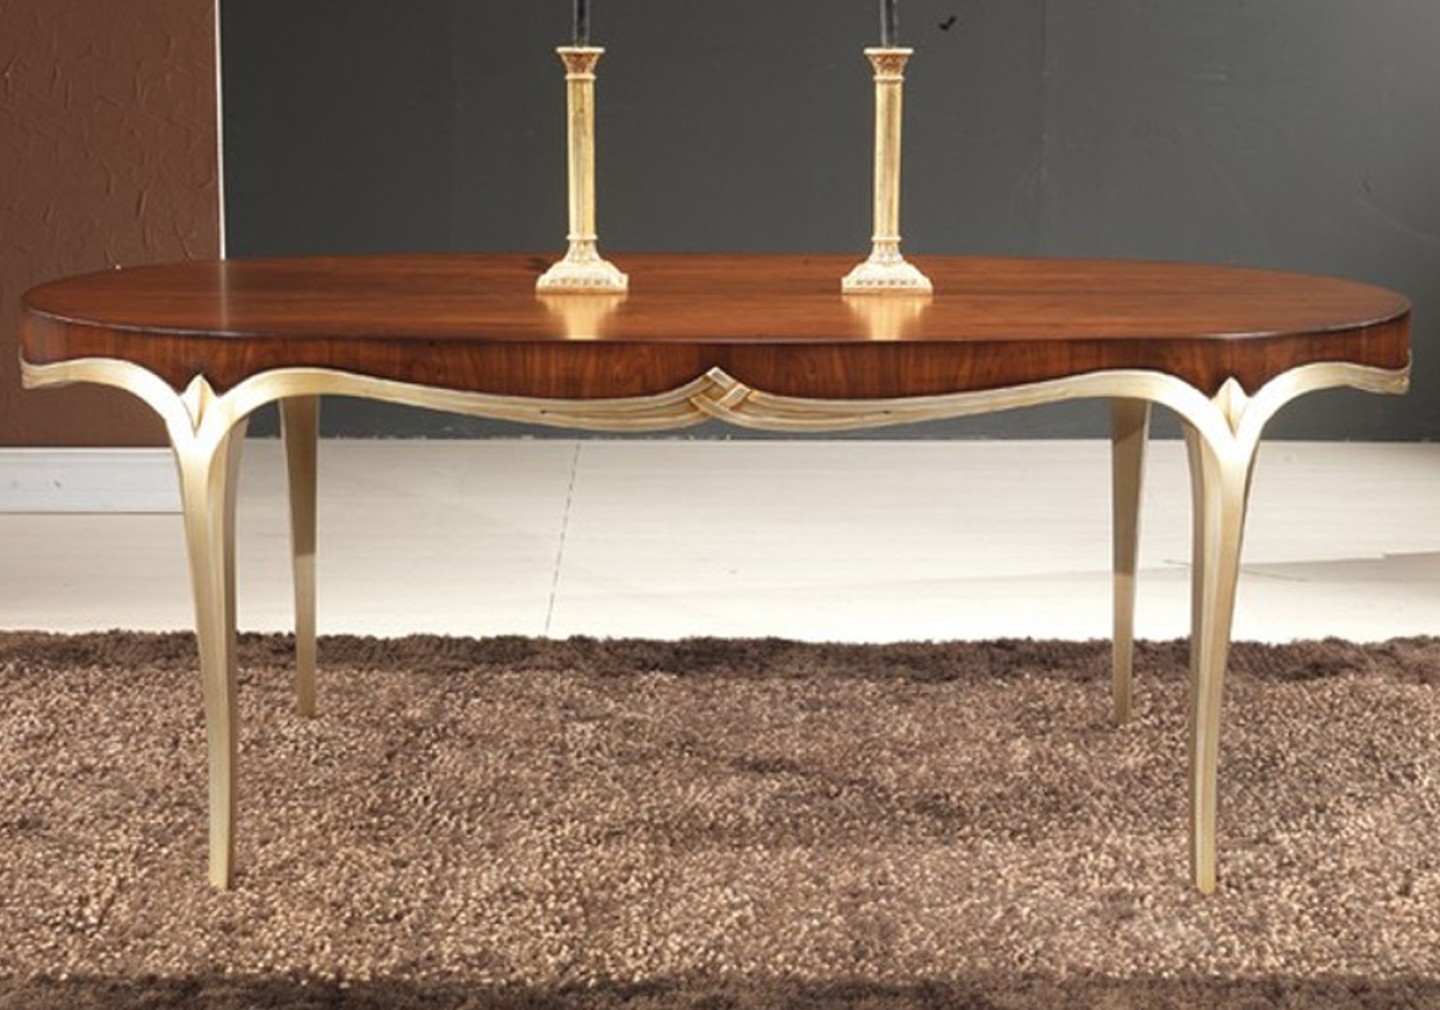 THE APOLLO OVAL CLASSIC DINING TABLE